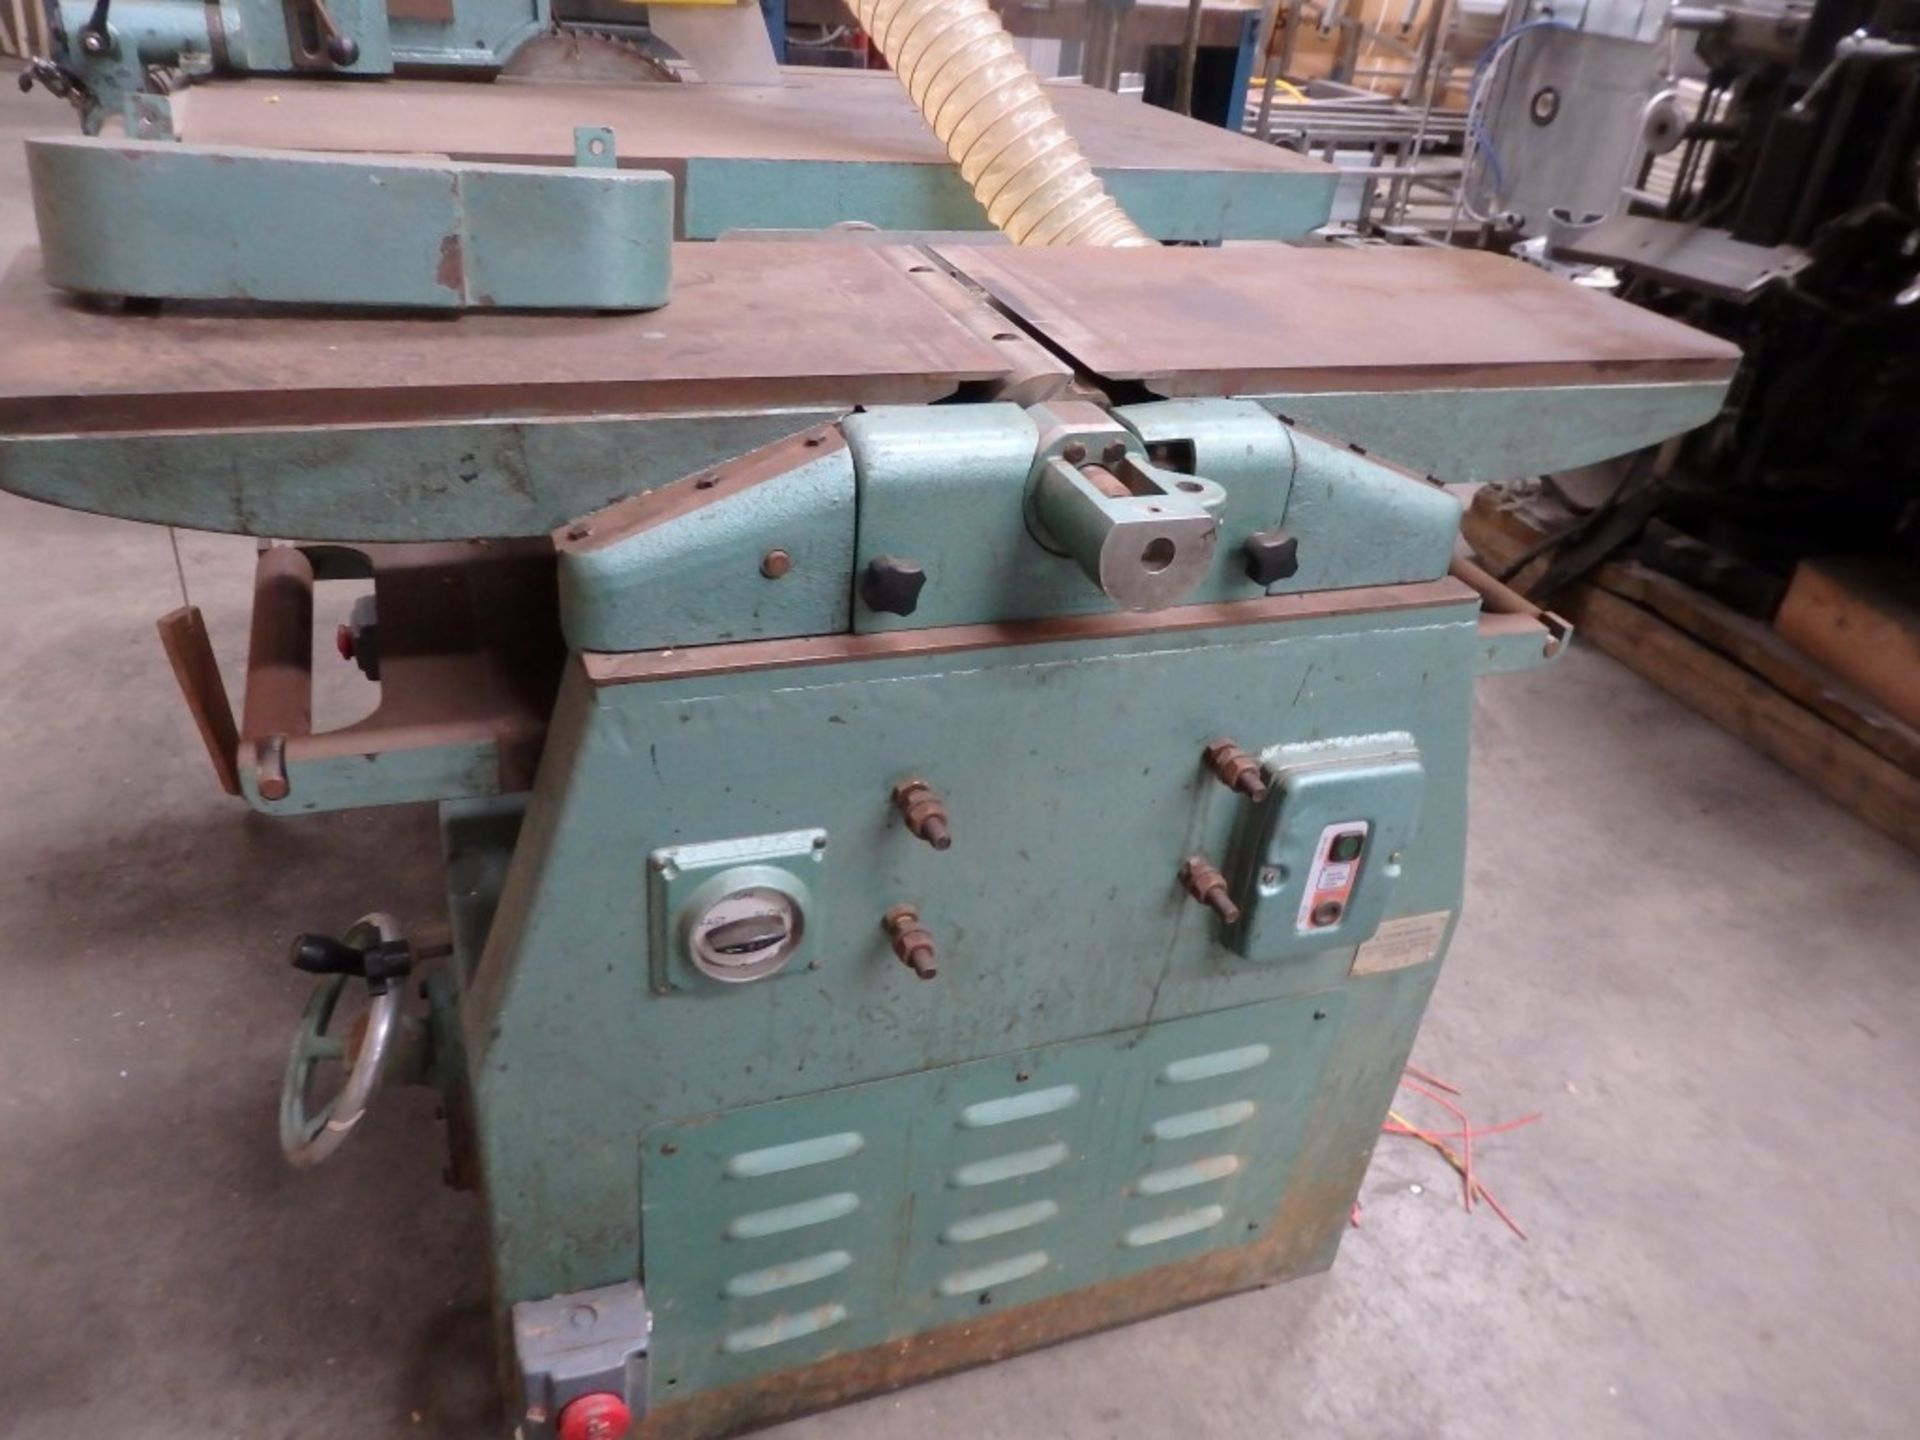 1 x COOKSLEY HEAVY DUTY UNIVERSAL MACHINE,(12"X9" PLANER THICKNESSER & 16" SAW COMBINATION) - Ref - Image 5 of 12